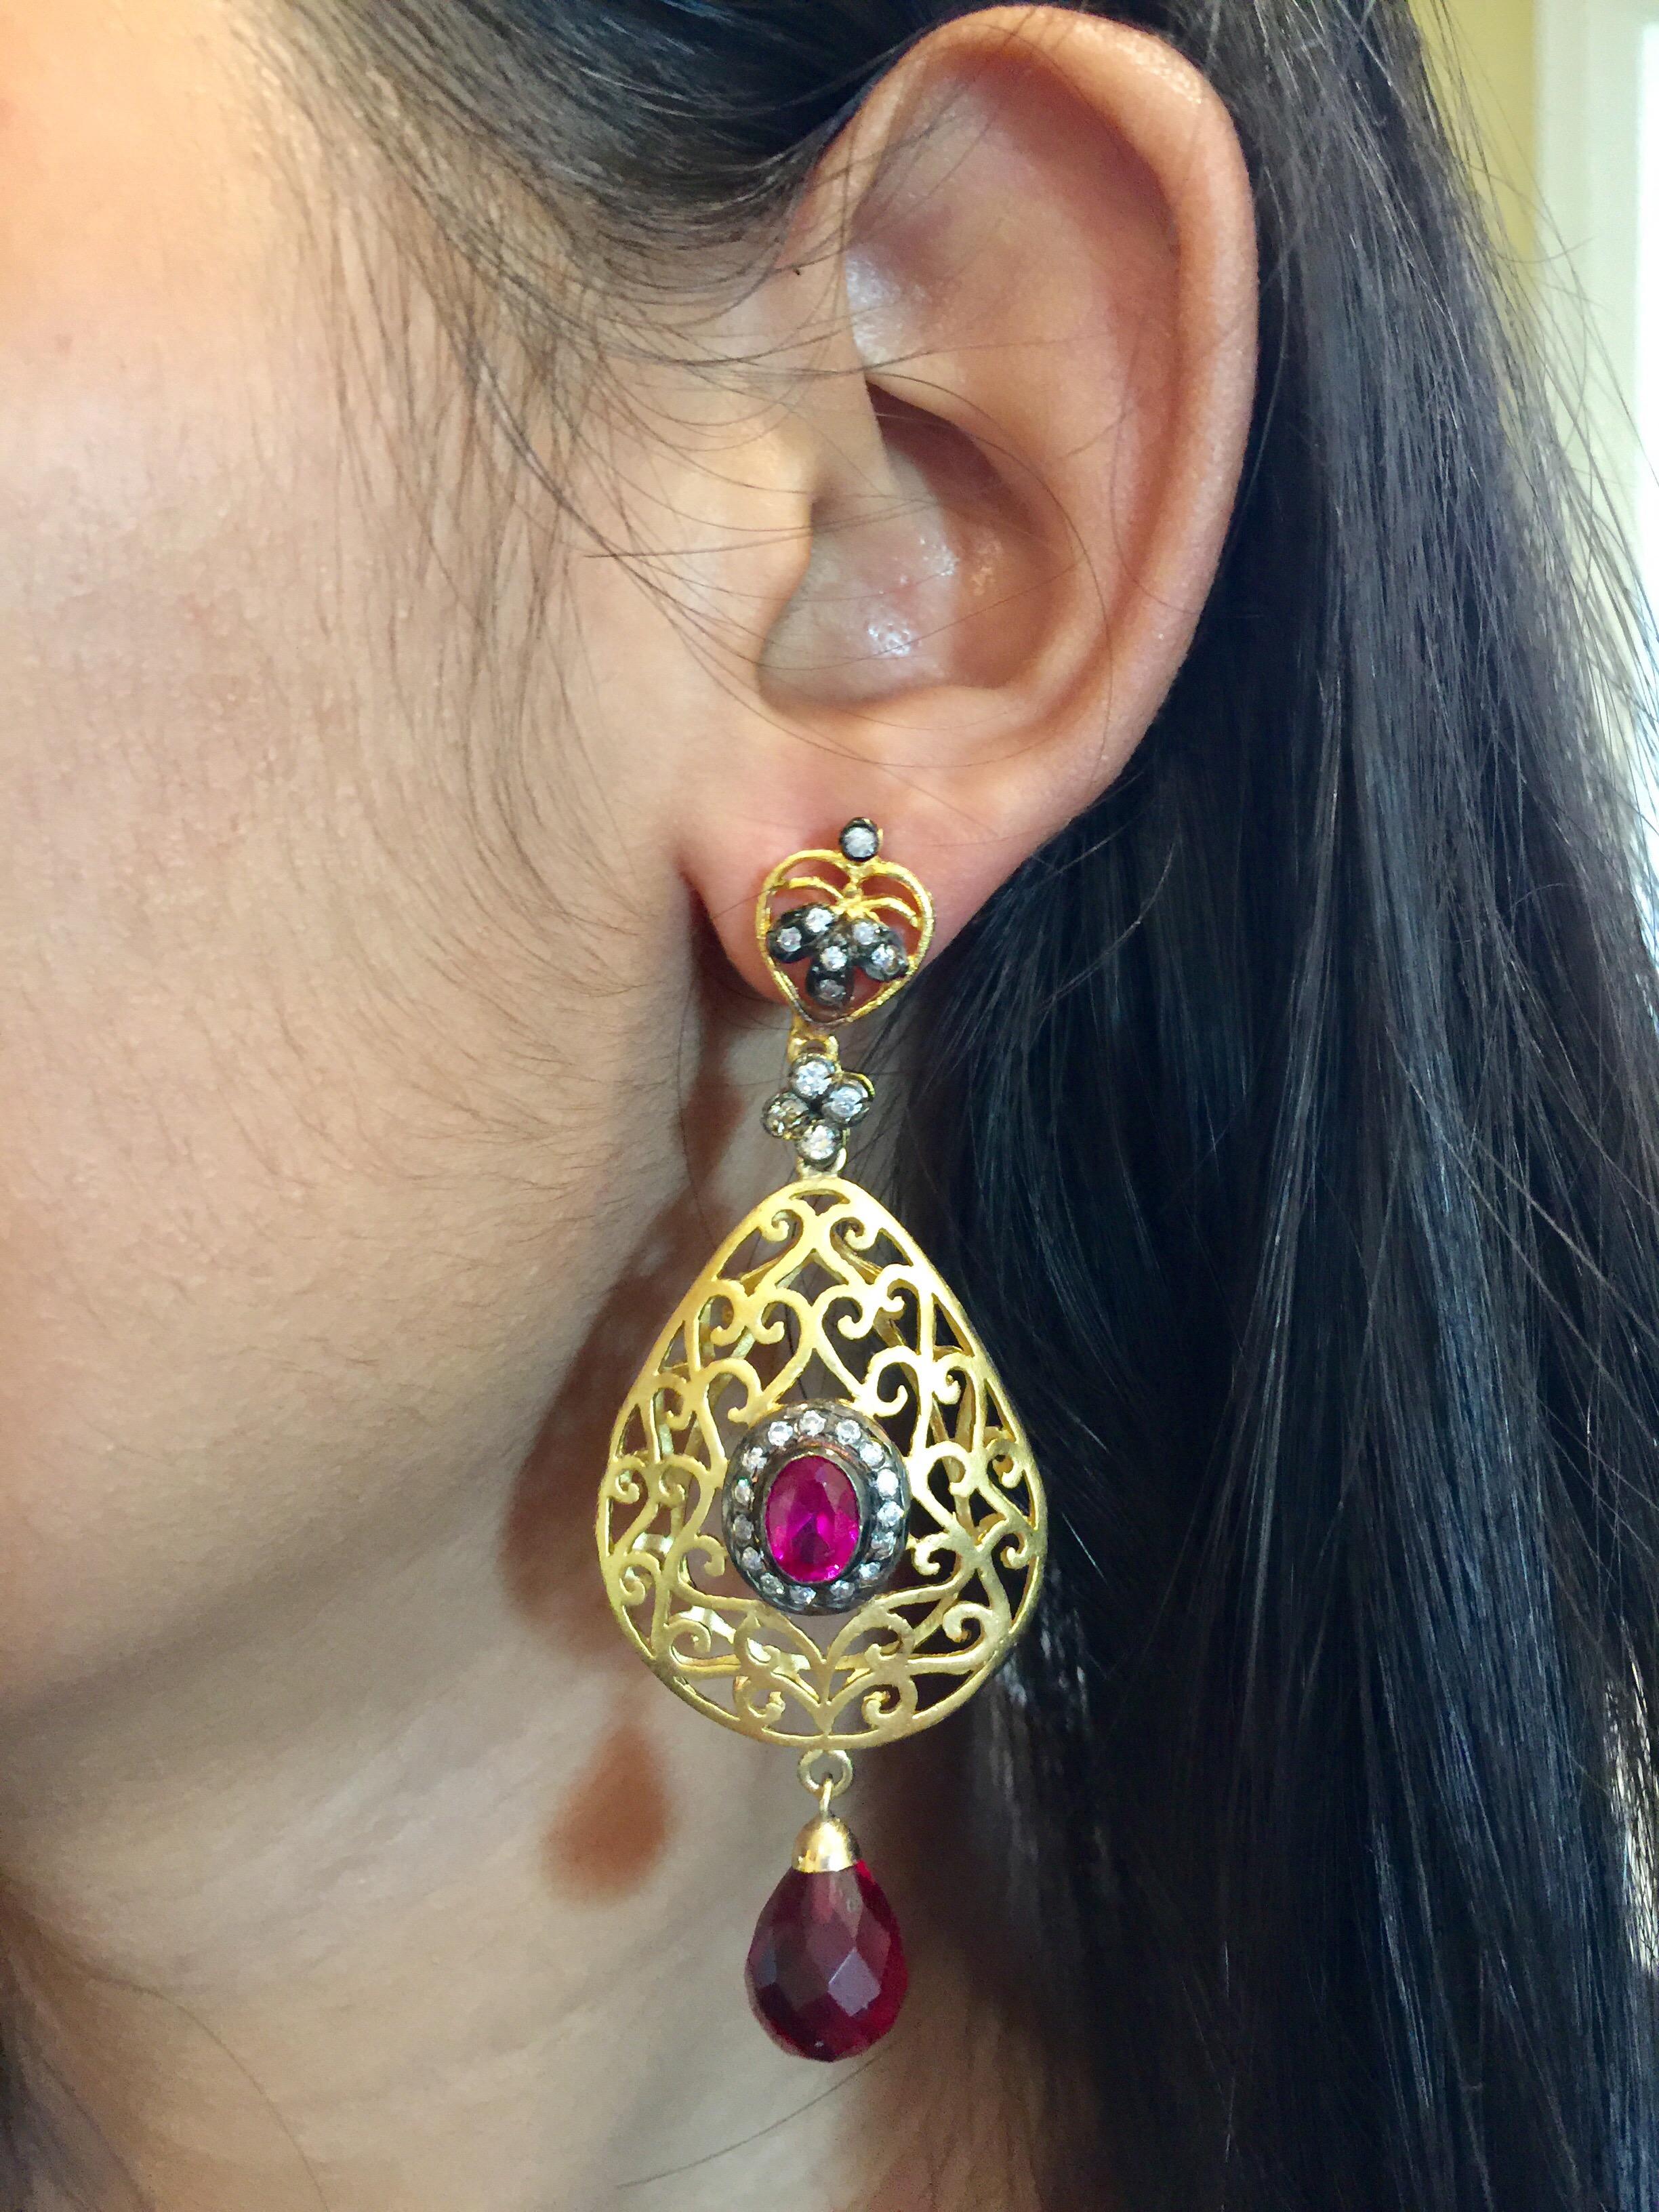 The handmade filigree faux ruby earrings is ornate and lovely, it is further enhanced by sparkling CZ stones. Earrings have a post closure for pierced ears.

Length: 2 3/4 inches
Width: 1 1/2 inches

FOLLOW  MEGHNA JEWELS storefront to view the